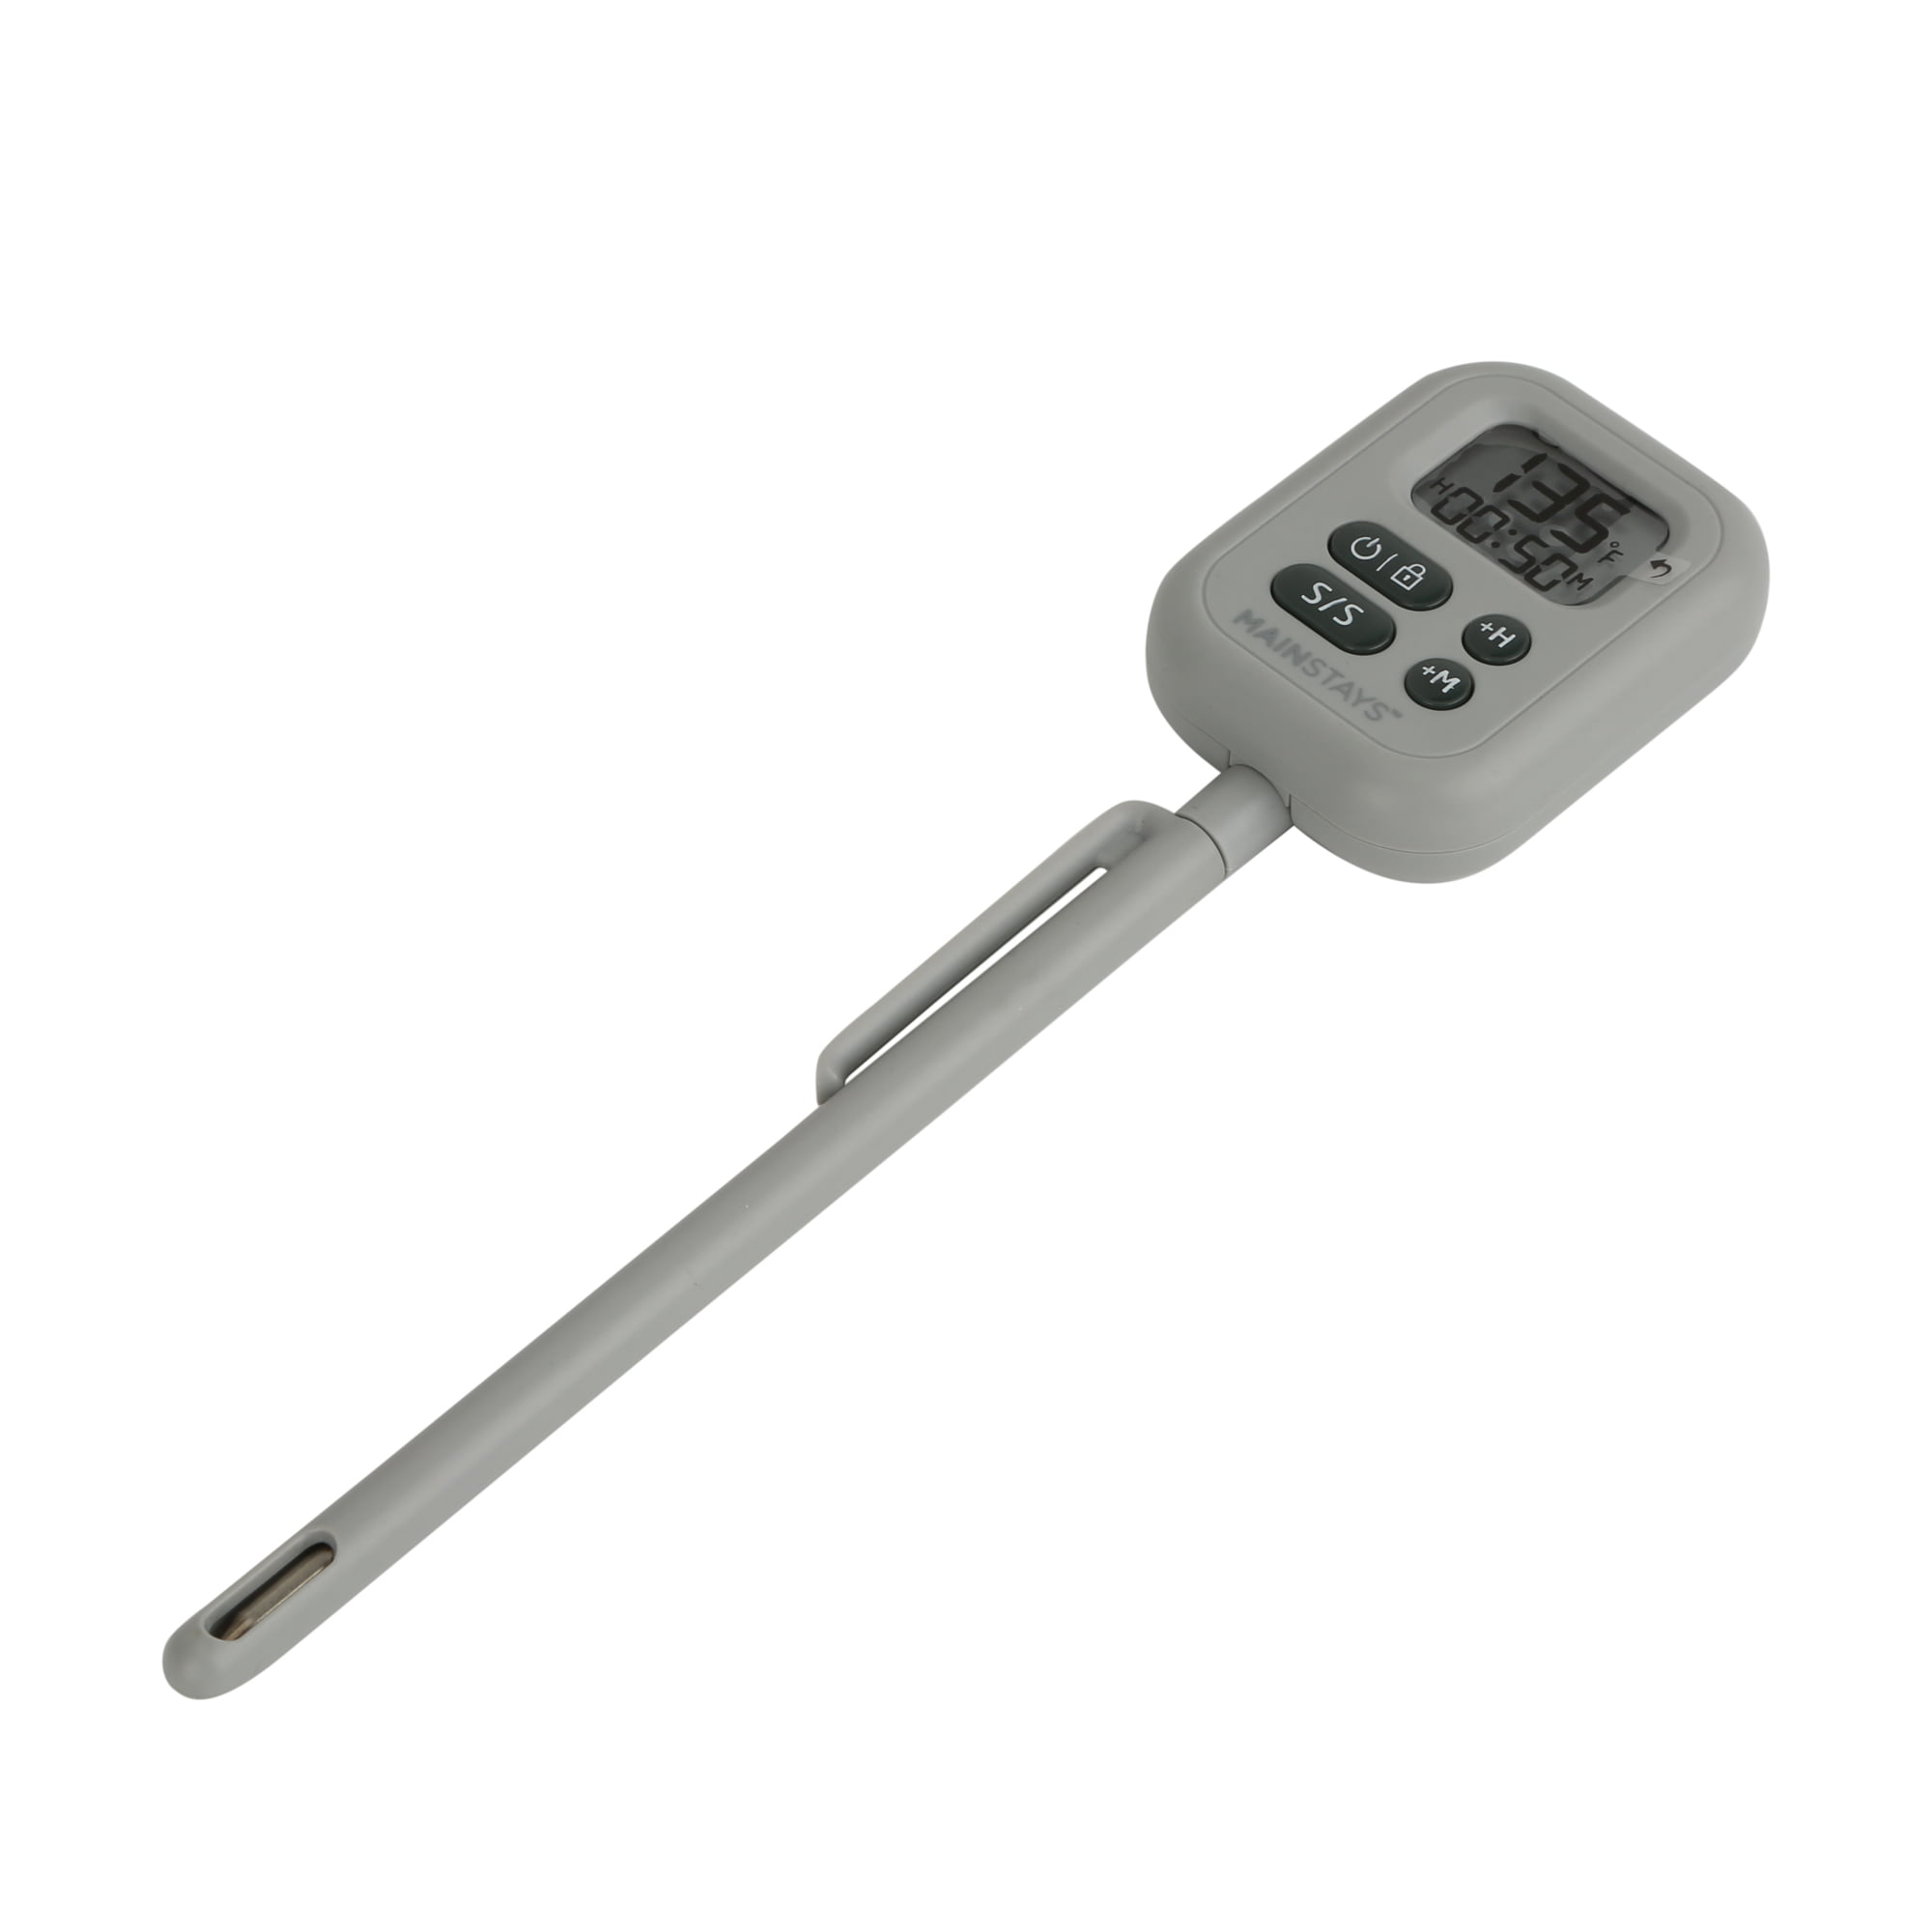 Parini Pocket Digital Instant Read Thermometer, Pen Style, LCD Screen, Stainless Steel Probe, Food Cooking Thermometer for Grill and Barbecue